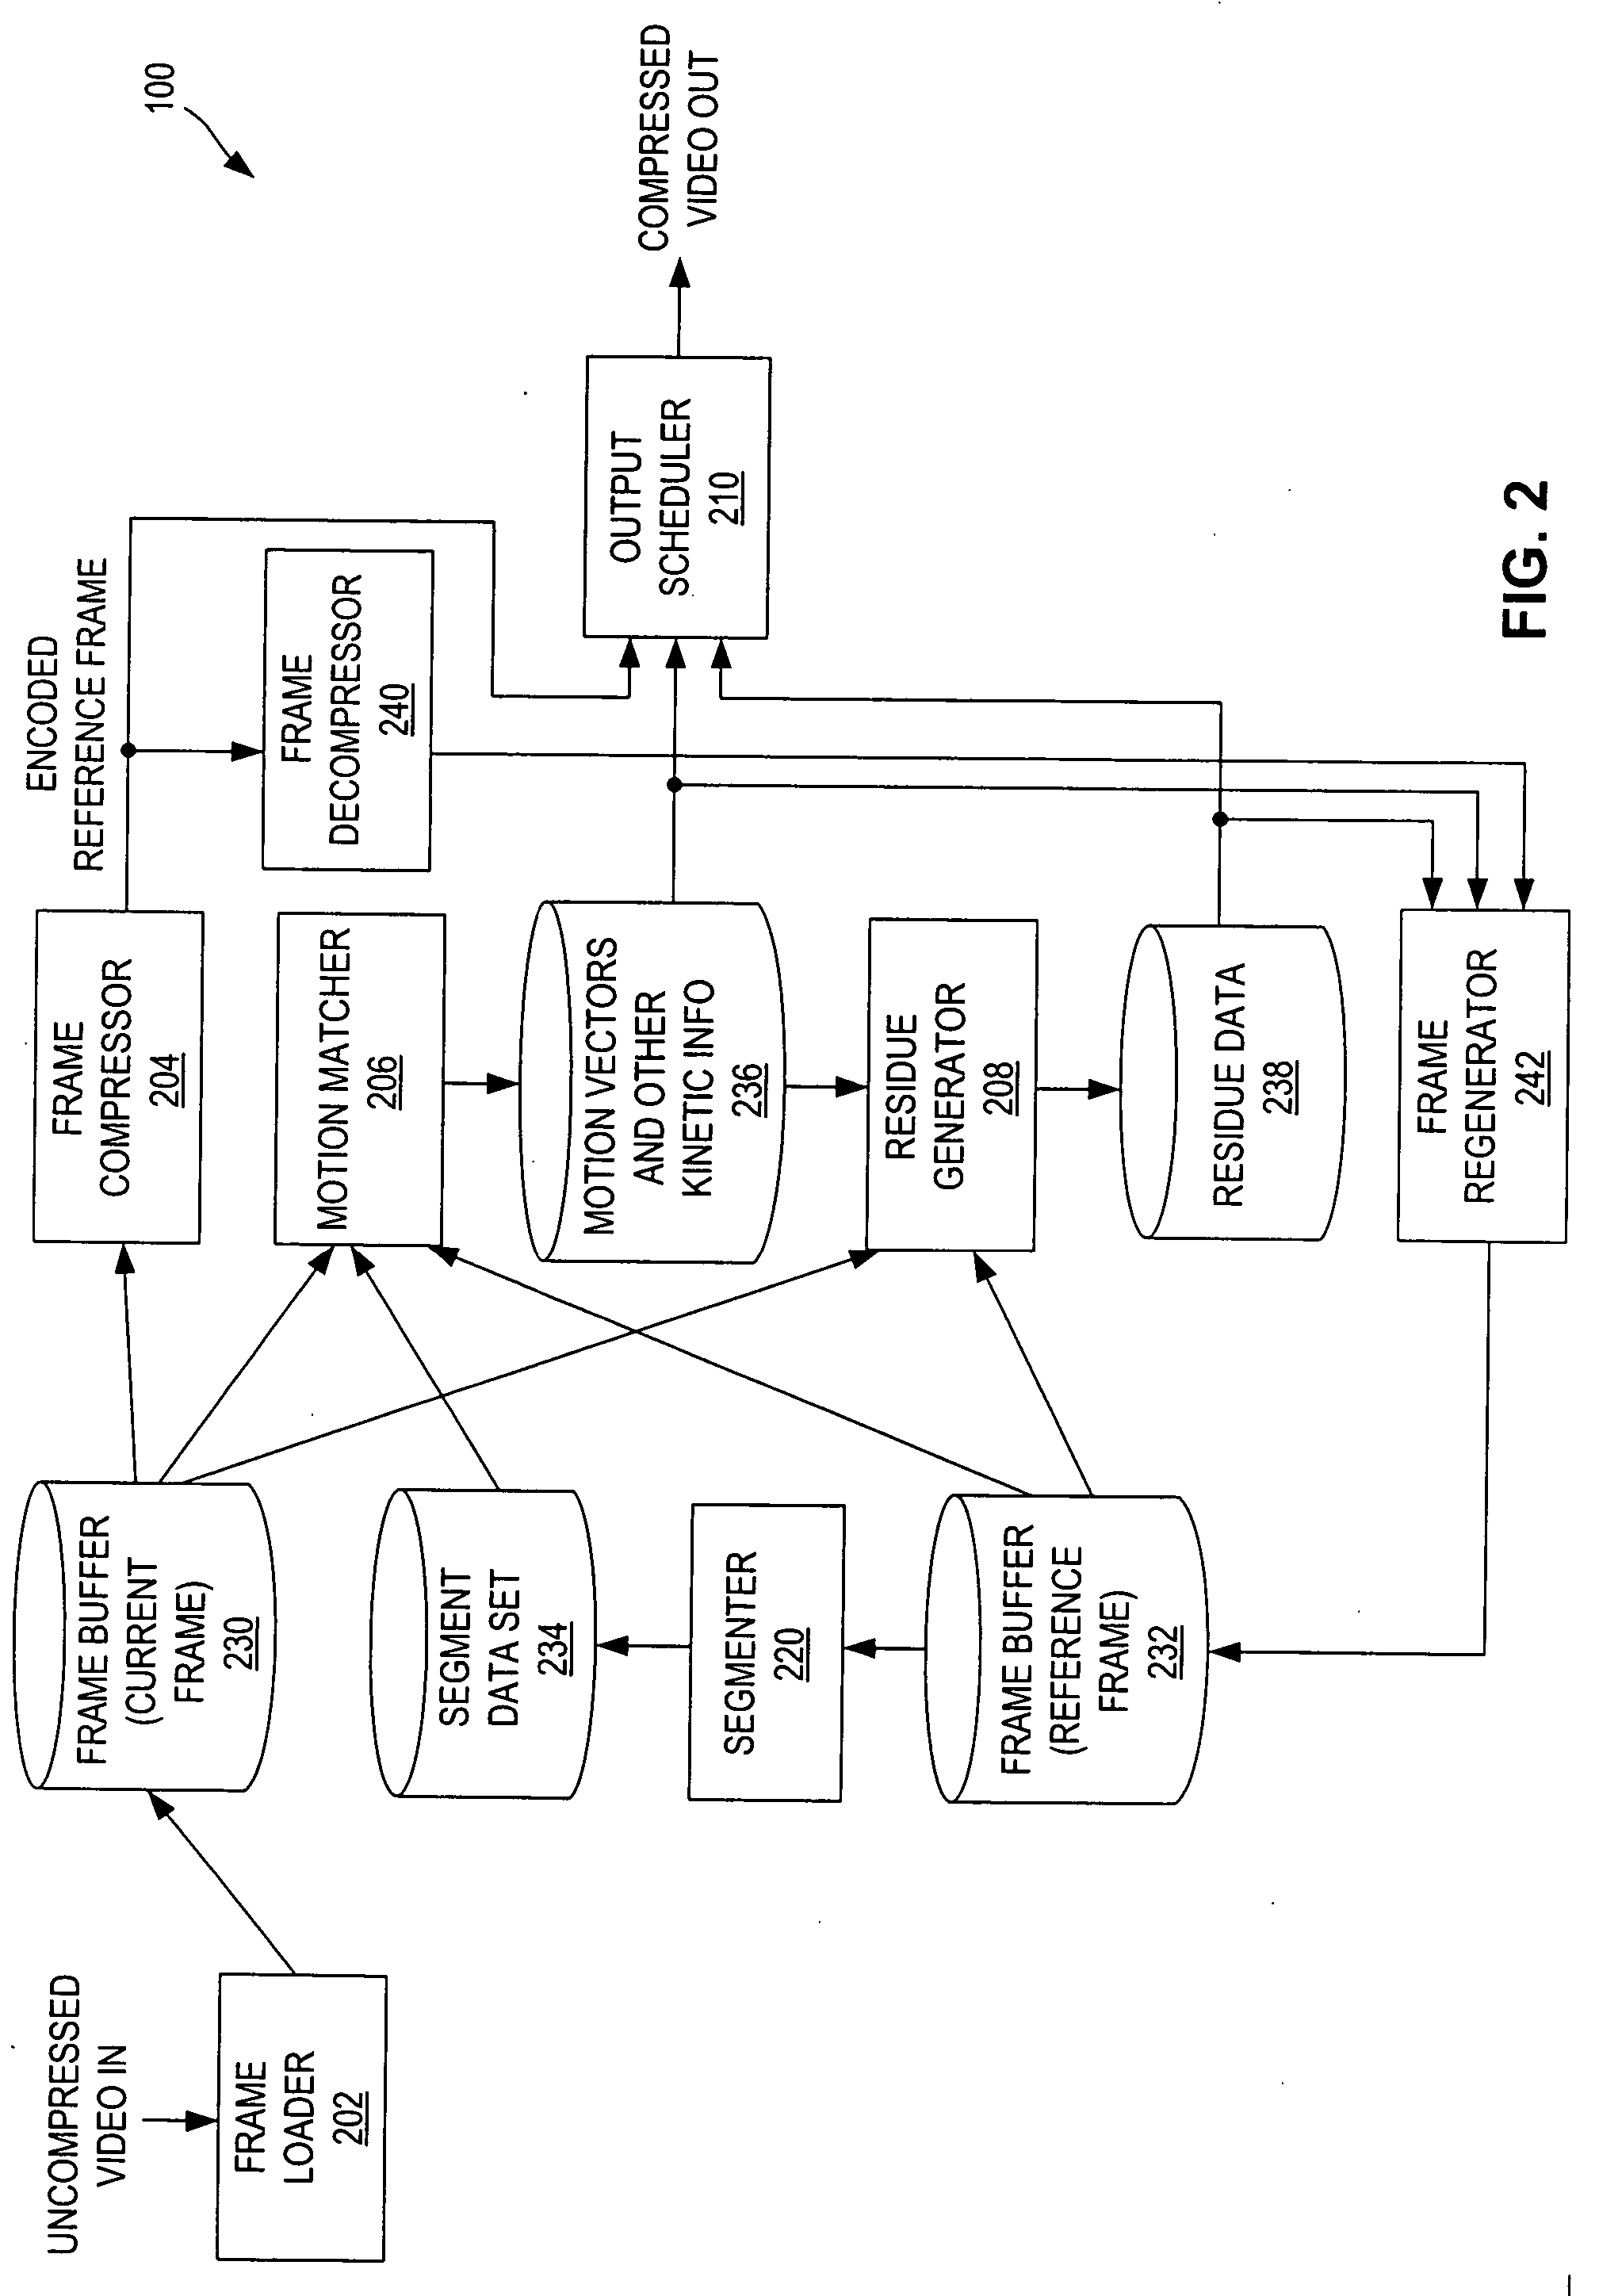 Segment-based encoding system using residue coding by basis function coefficients